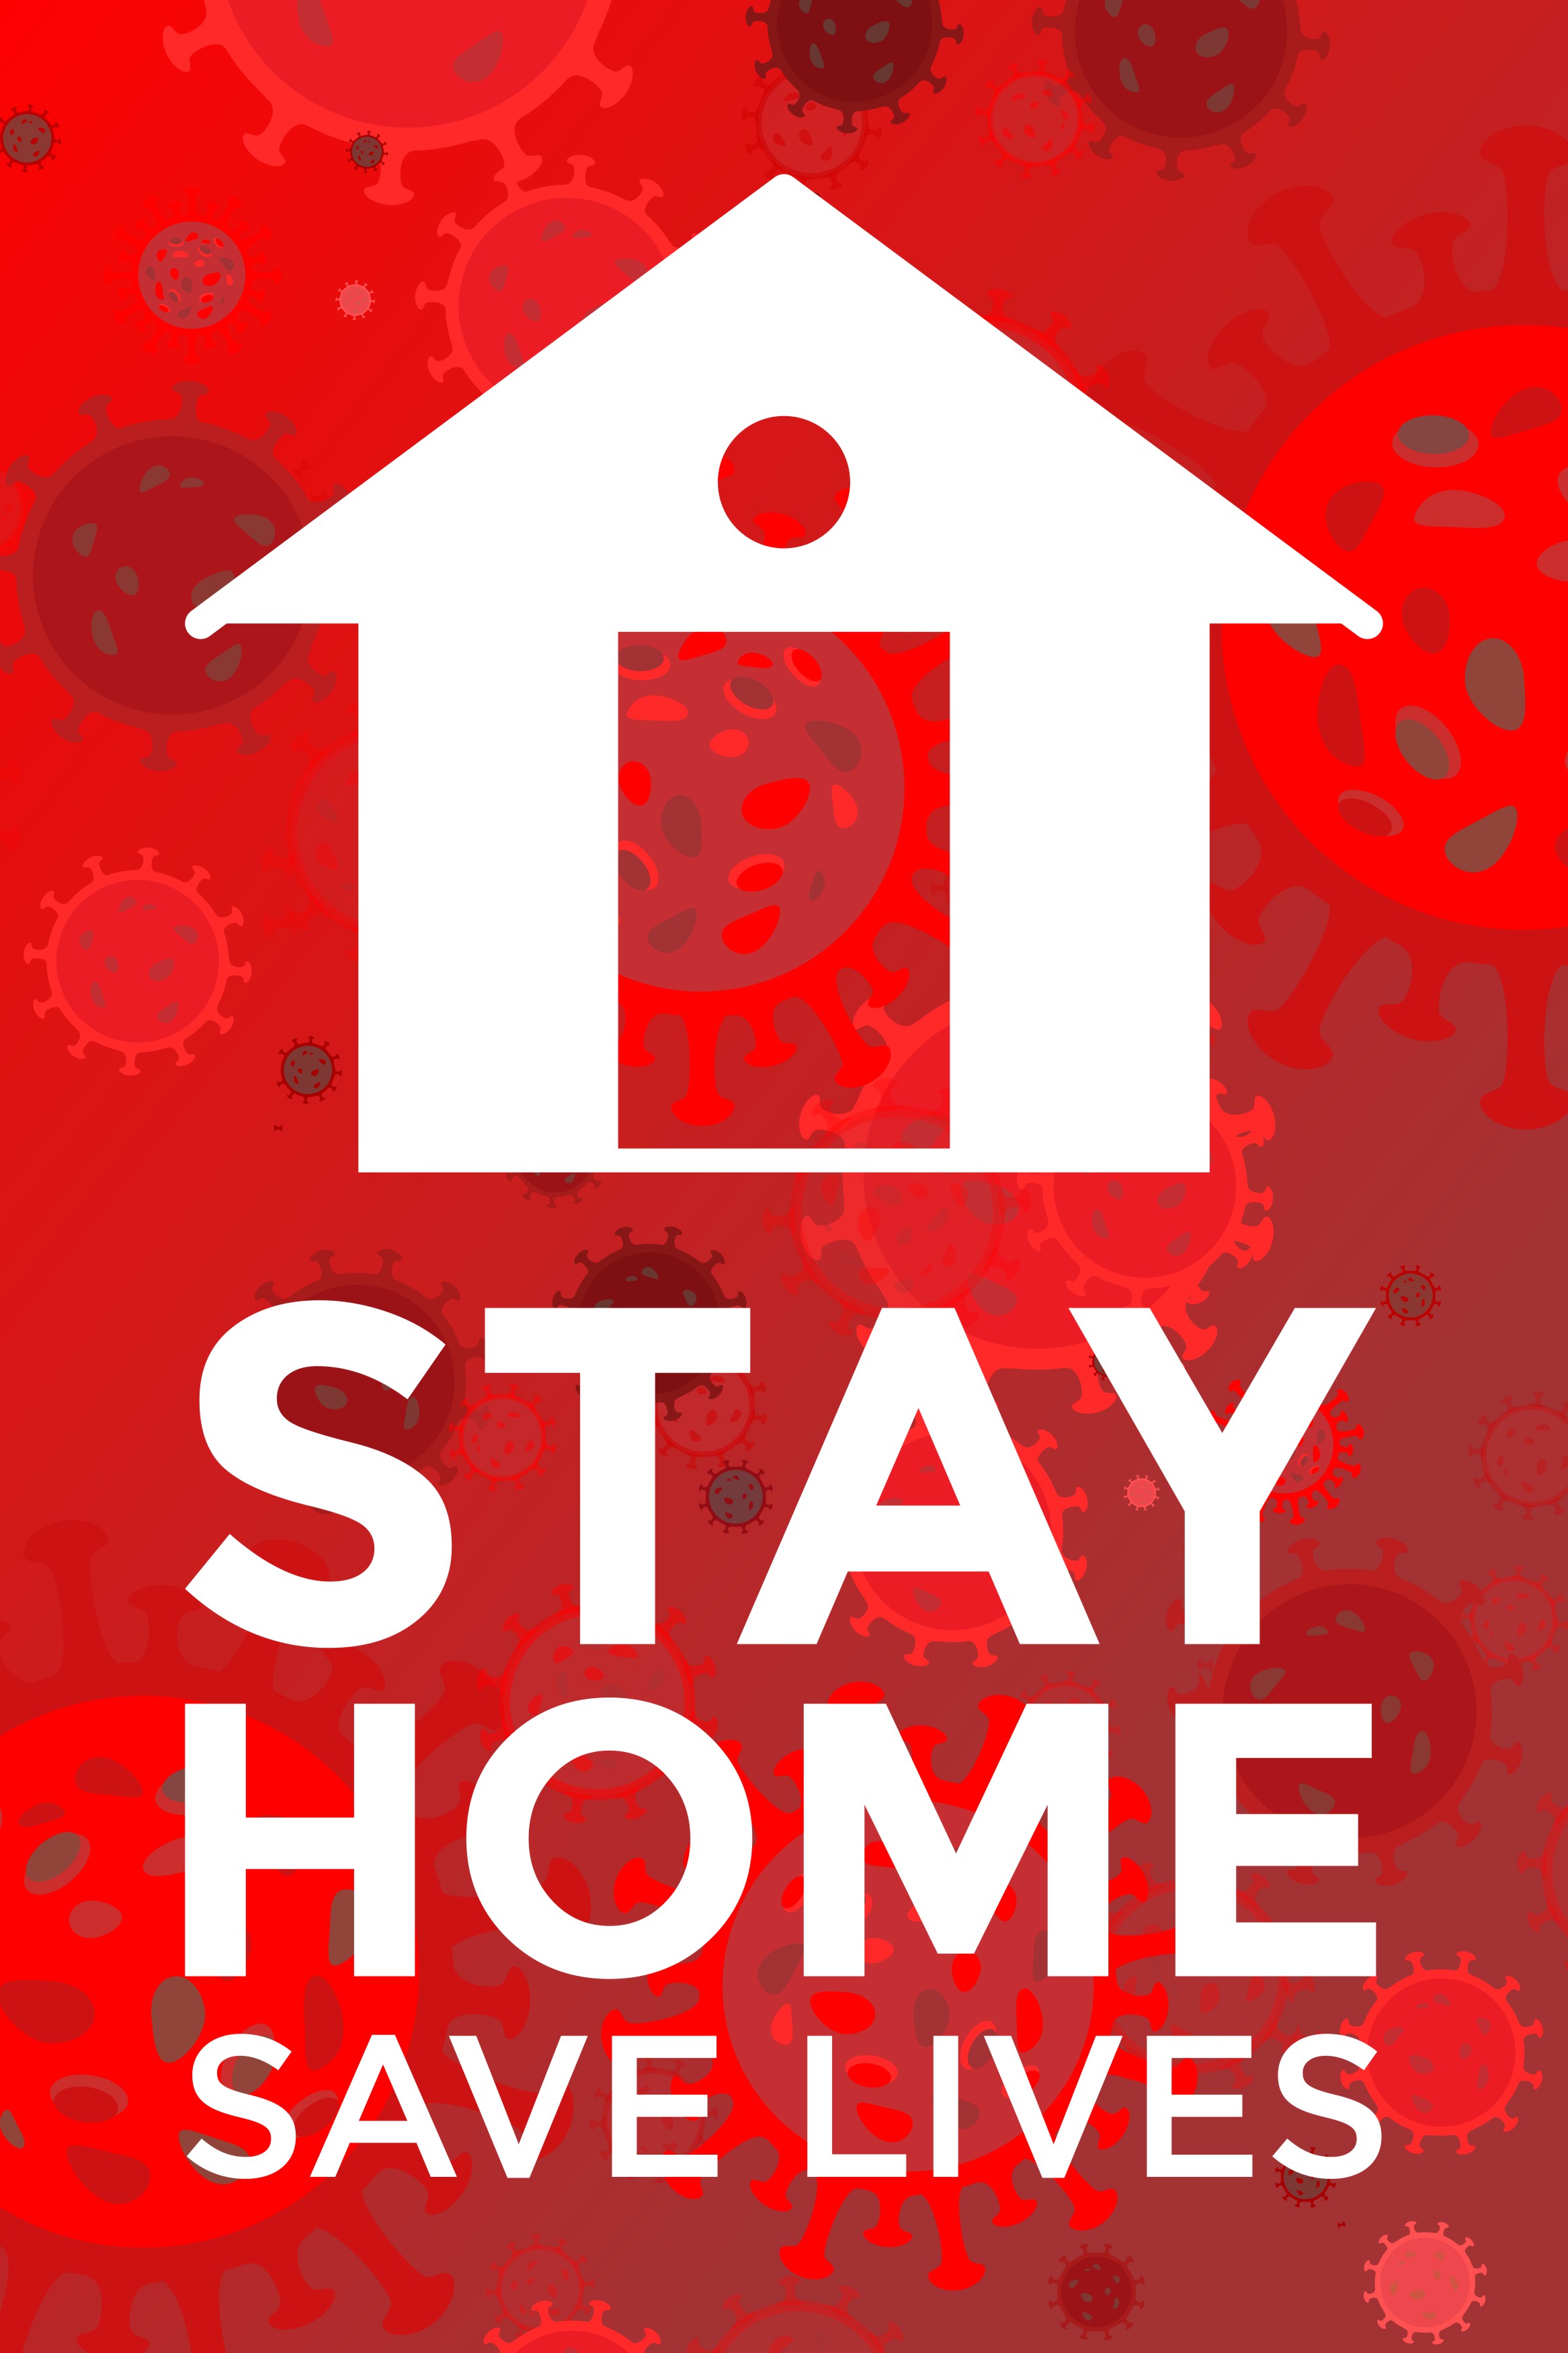 Stay Home Save Lives Red Poster - Download Free Vectors, Clipart